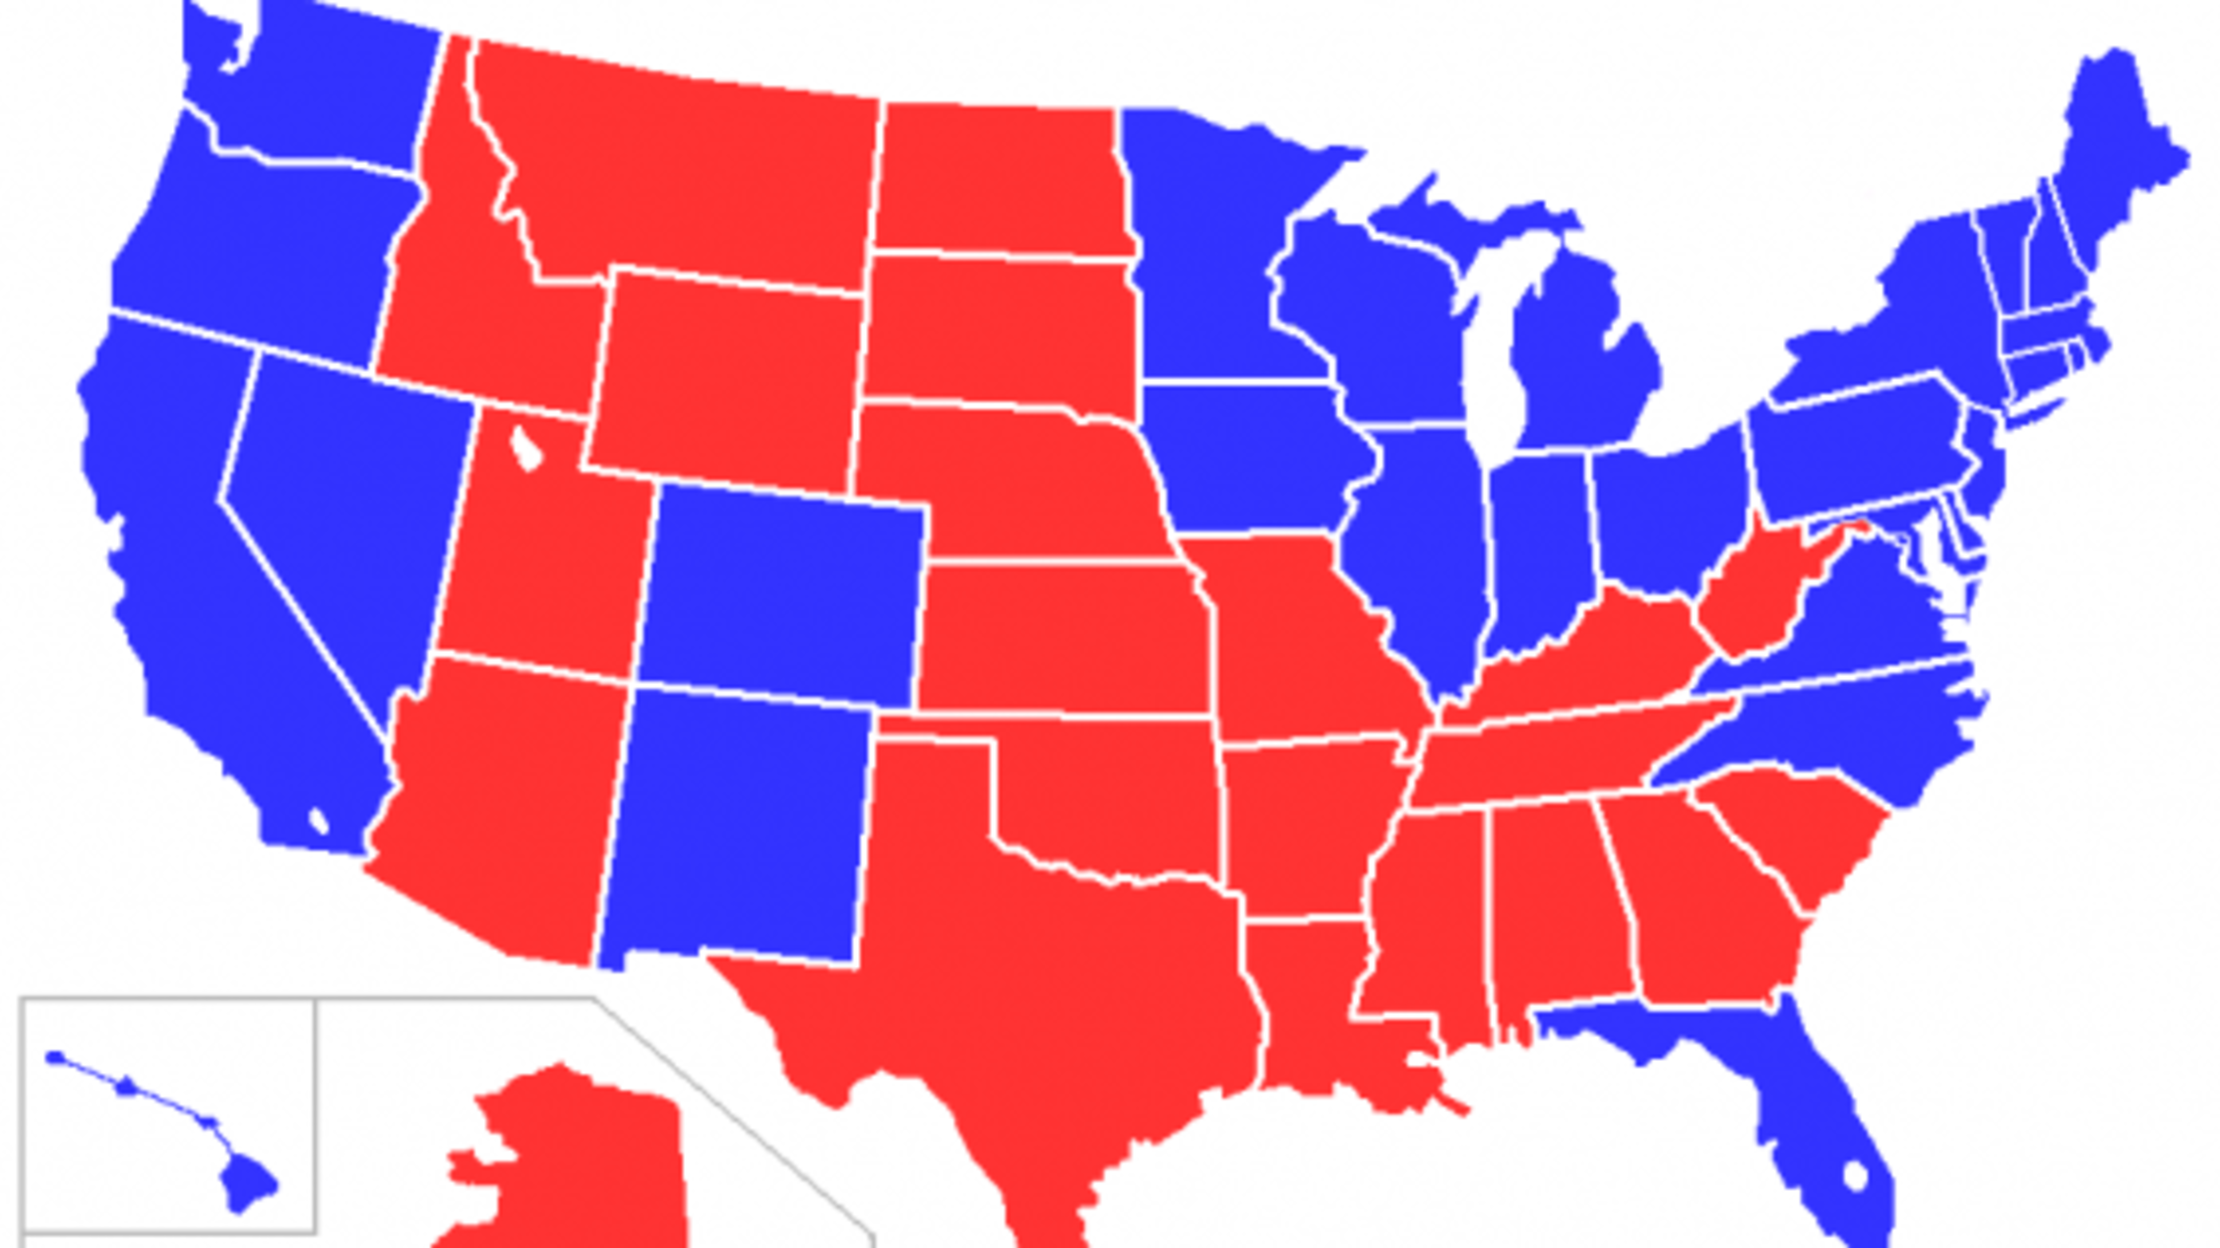 Where Did The Idea Of "Red States" and "Blue States" Come From